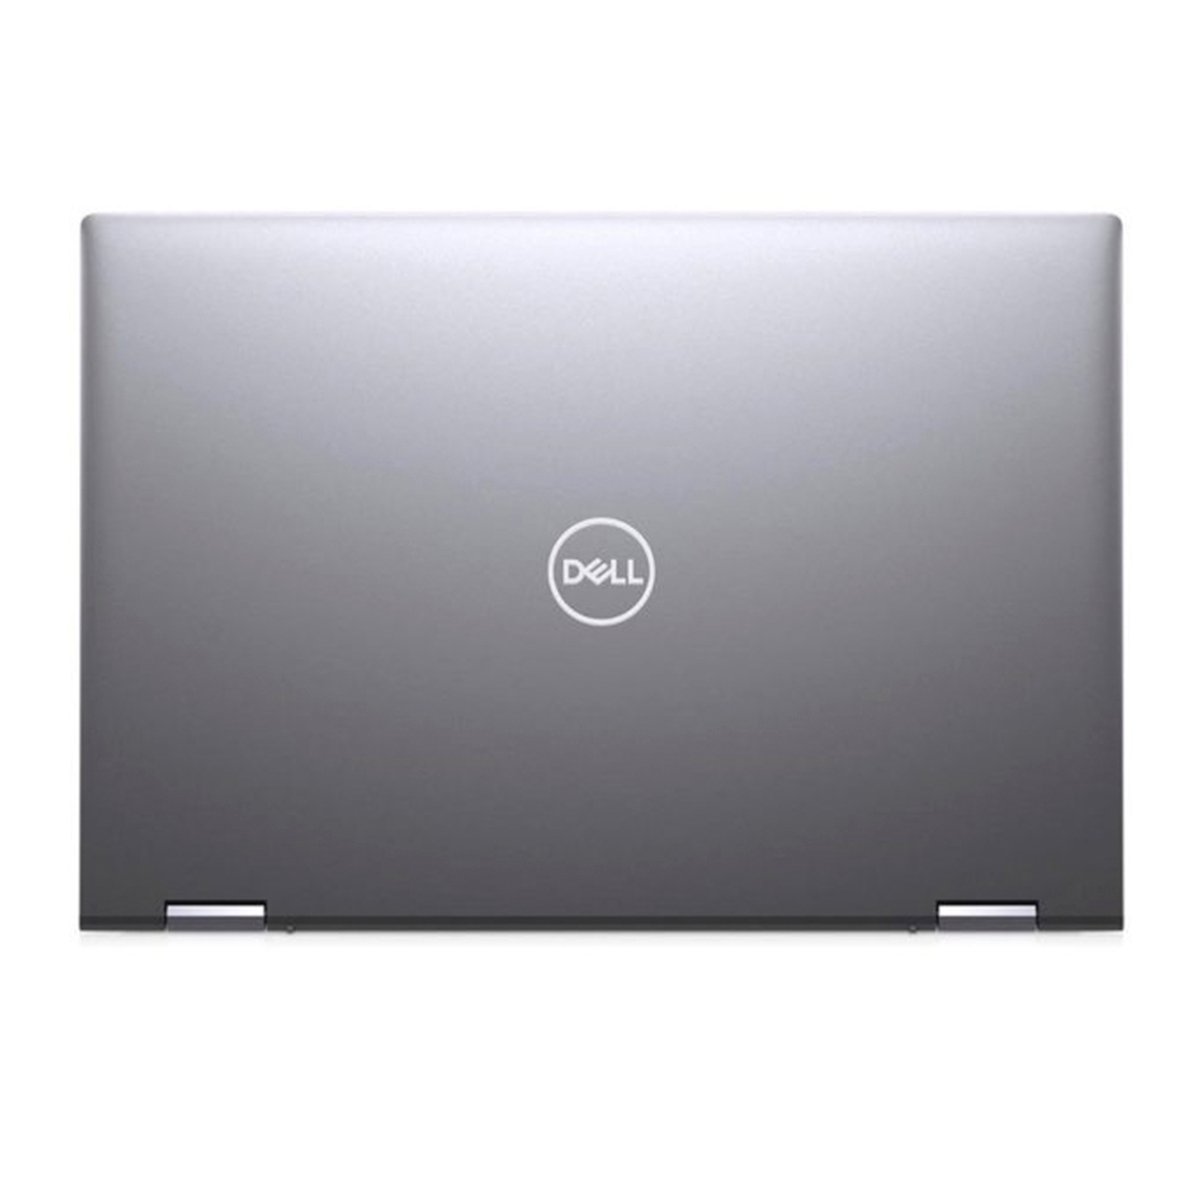 Dell Inspiron 14 (5400-INS-5050B)2in1 Laptop i5-1035G1, 8GB RAM, 512GB SSD, 14" FHD Touch Screen, Titan Gray